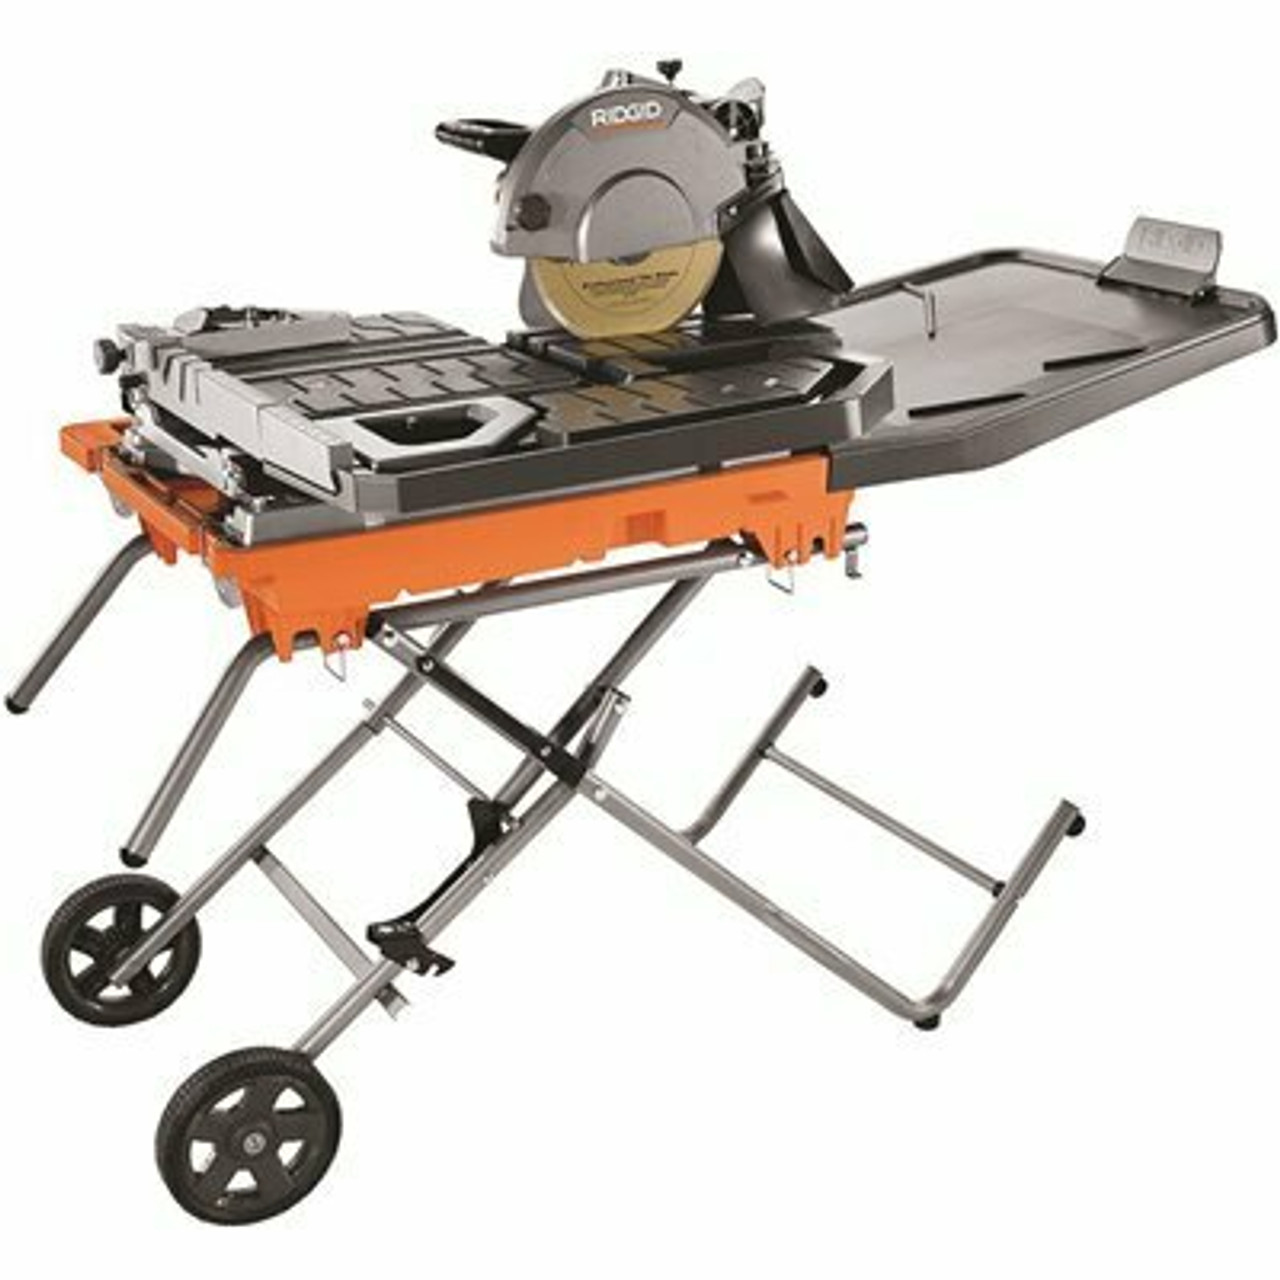 Ridgid 10 In. Wet Tile Saw With Stand